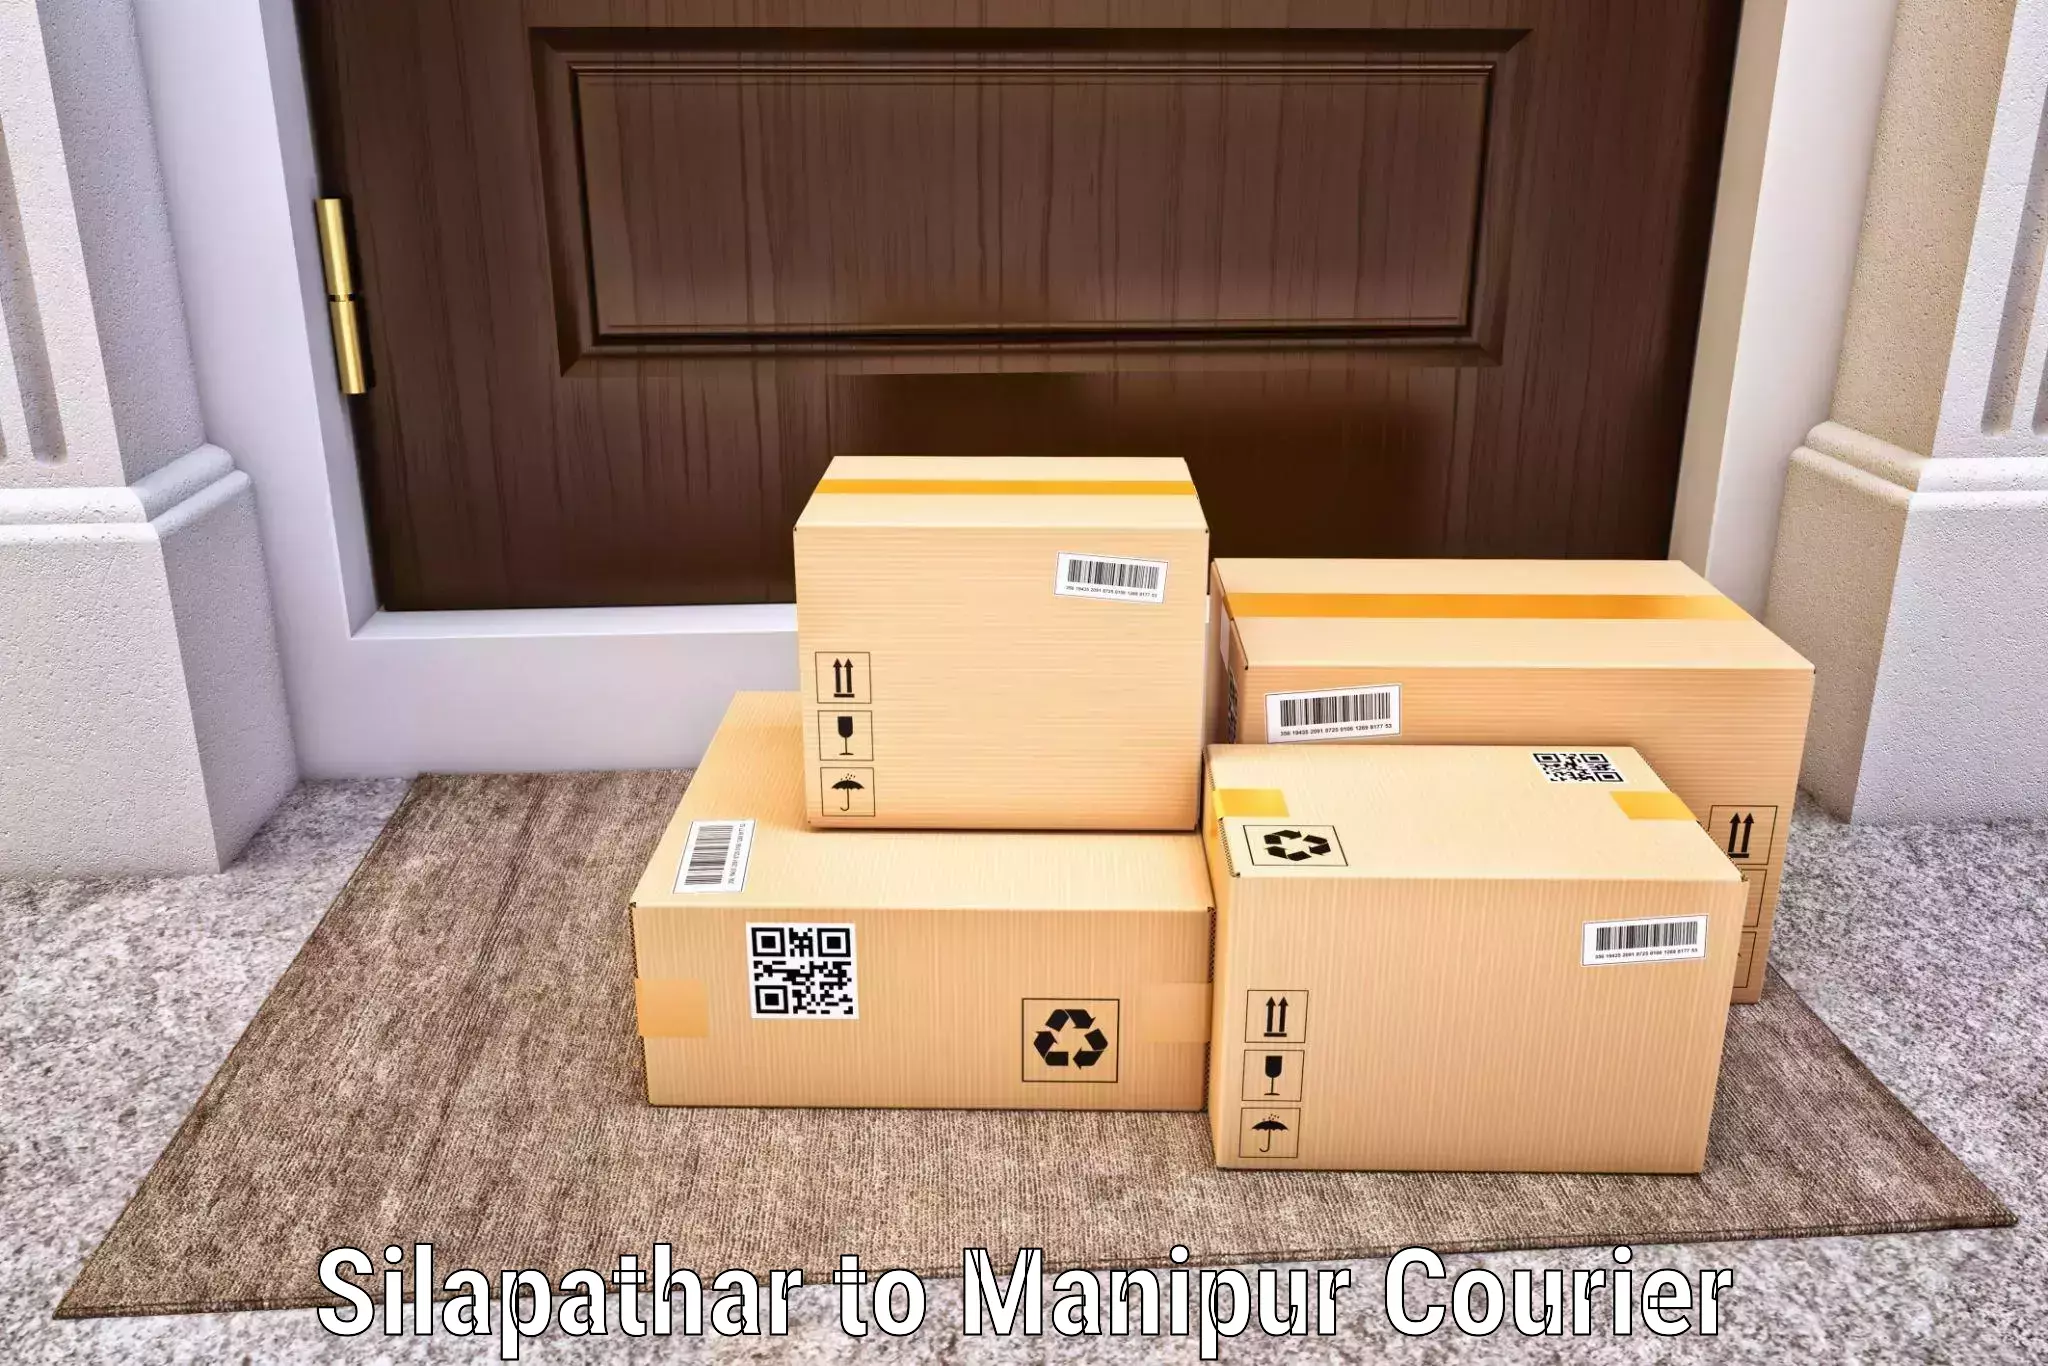 Trackable shipping service Silapathar to Thoubal